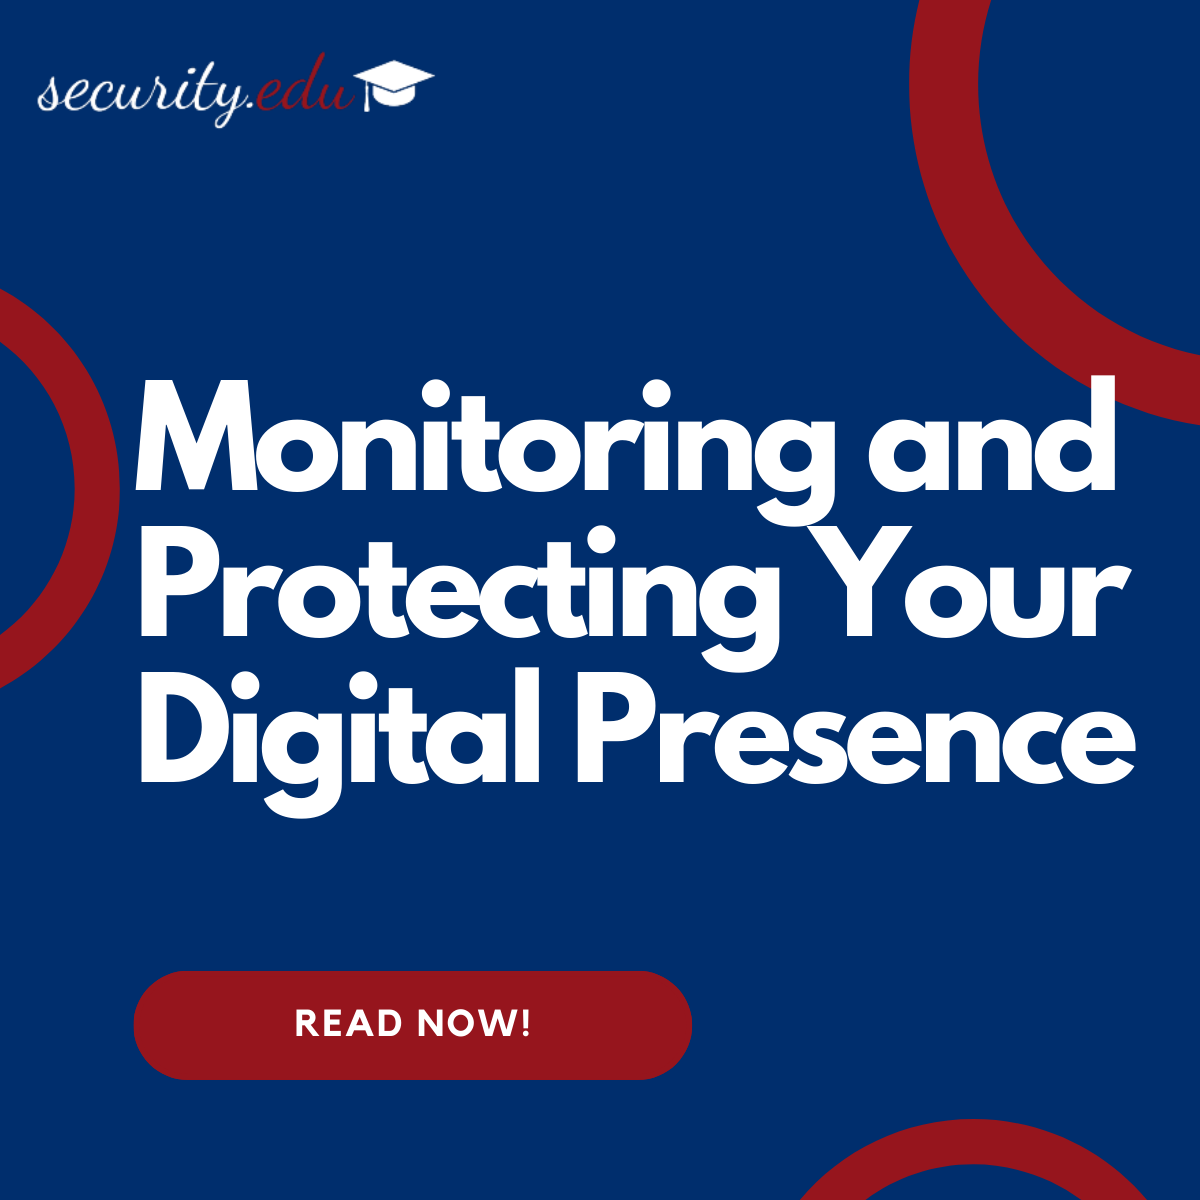 Monitoring and Protecting Your Digital Presence